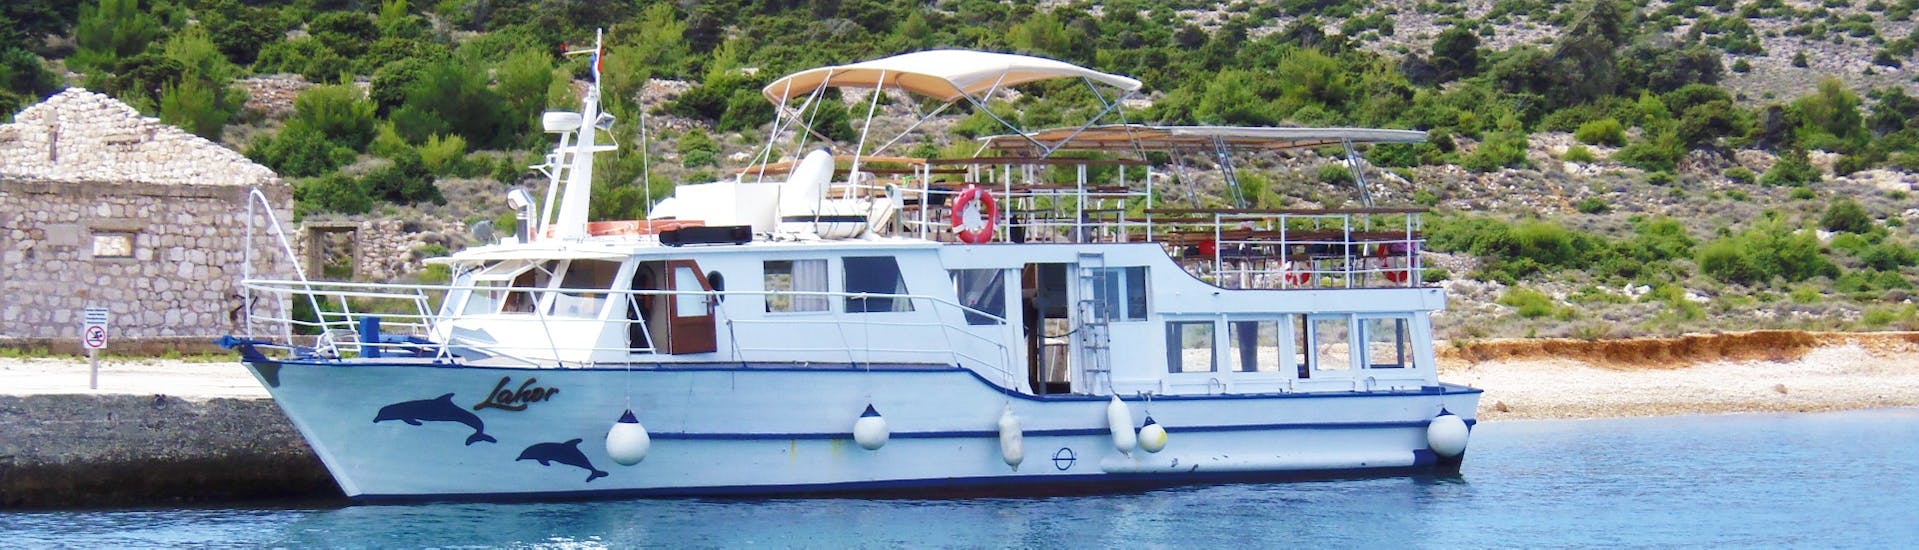 The Boat Trip from Punat to Plavnik Island is ready to start.